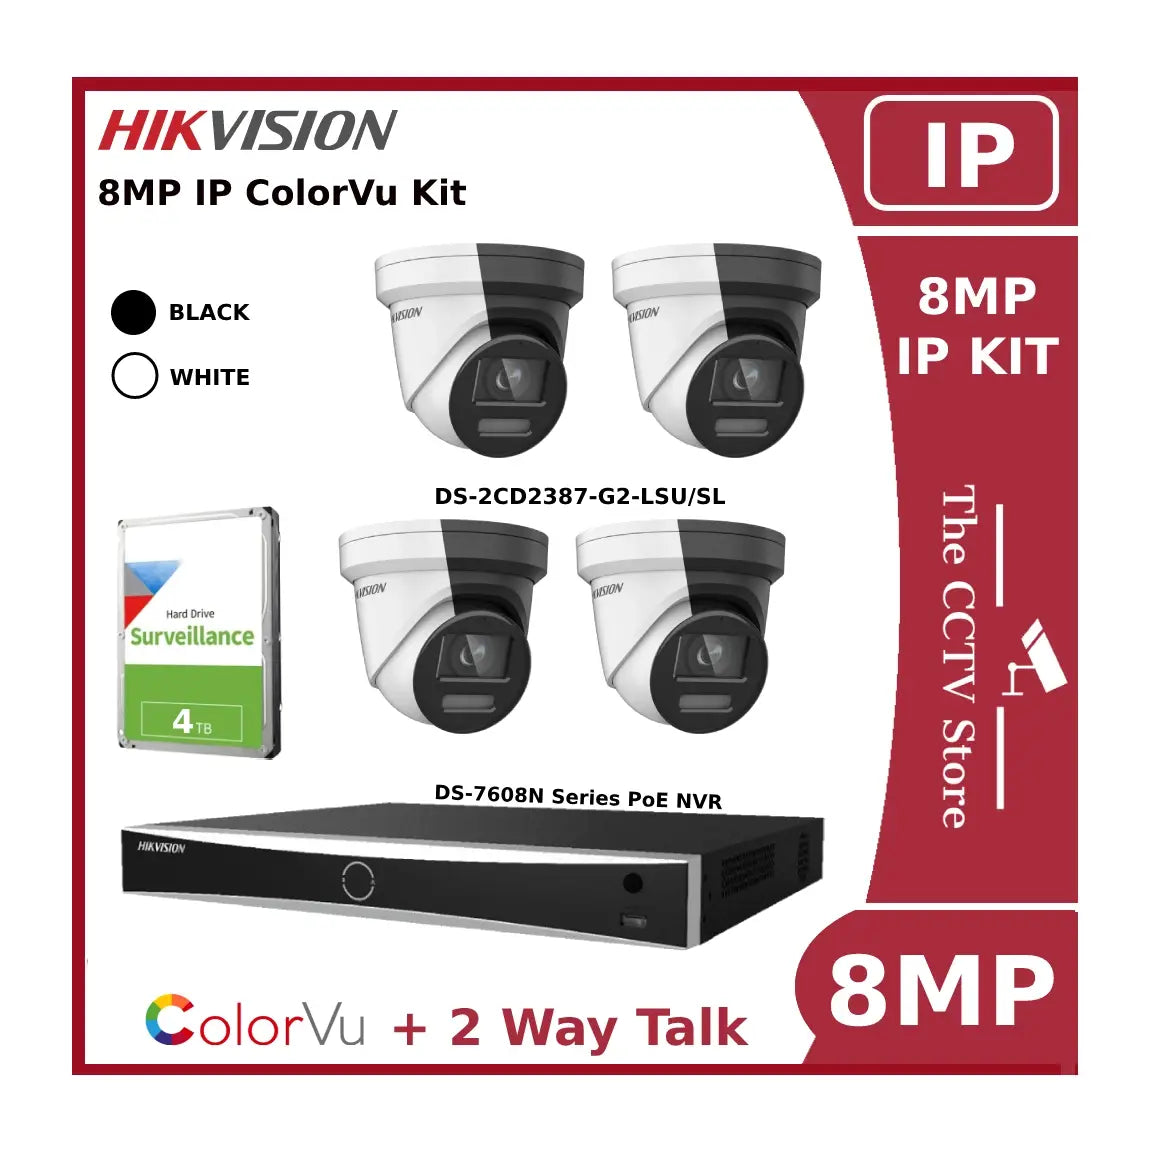 Hikvision 8MP 4CH IP ColorVu Kit with 8CH AcuSense NVR and 4TB HDD